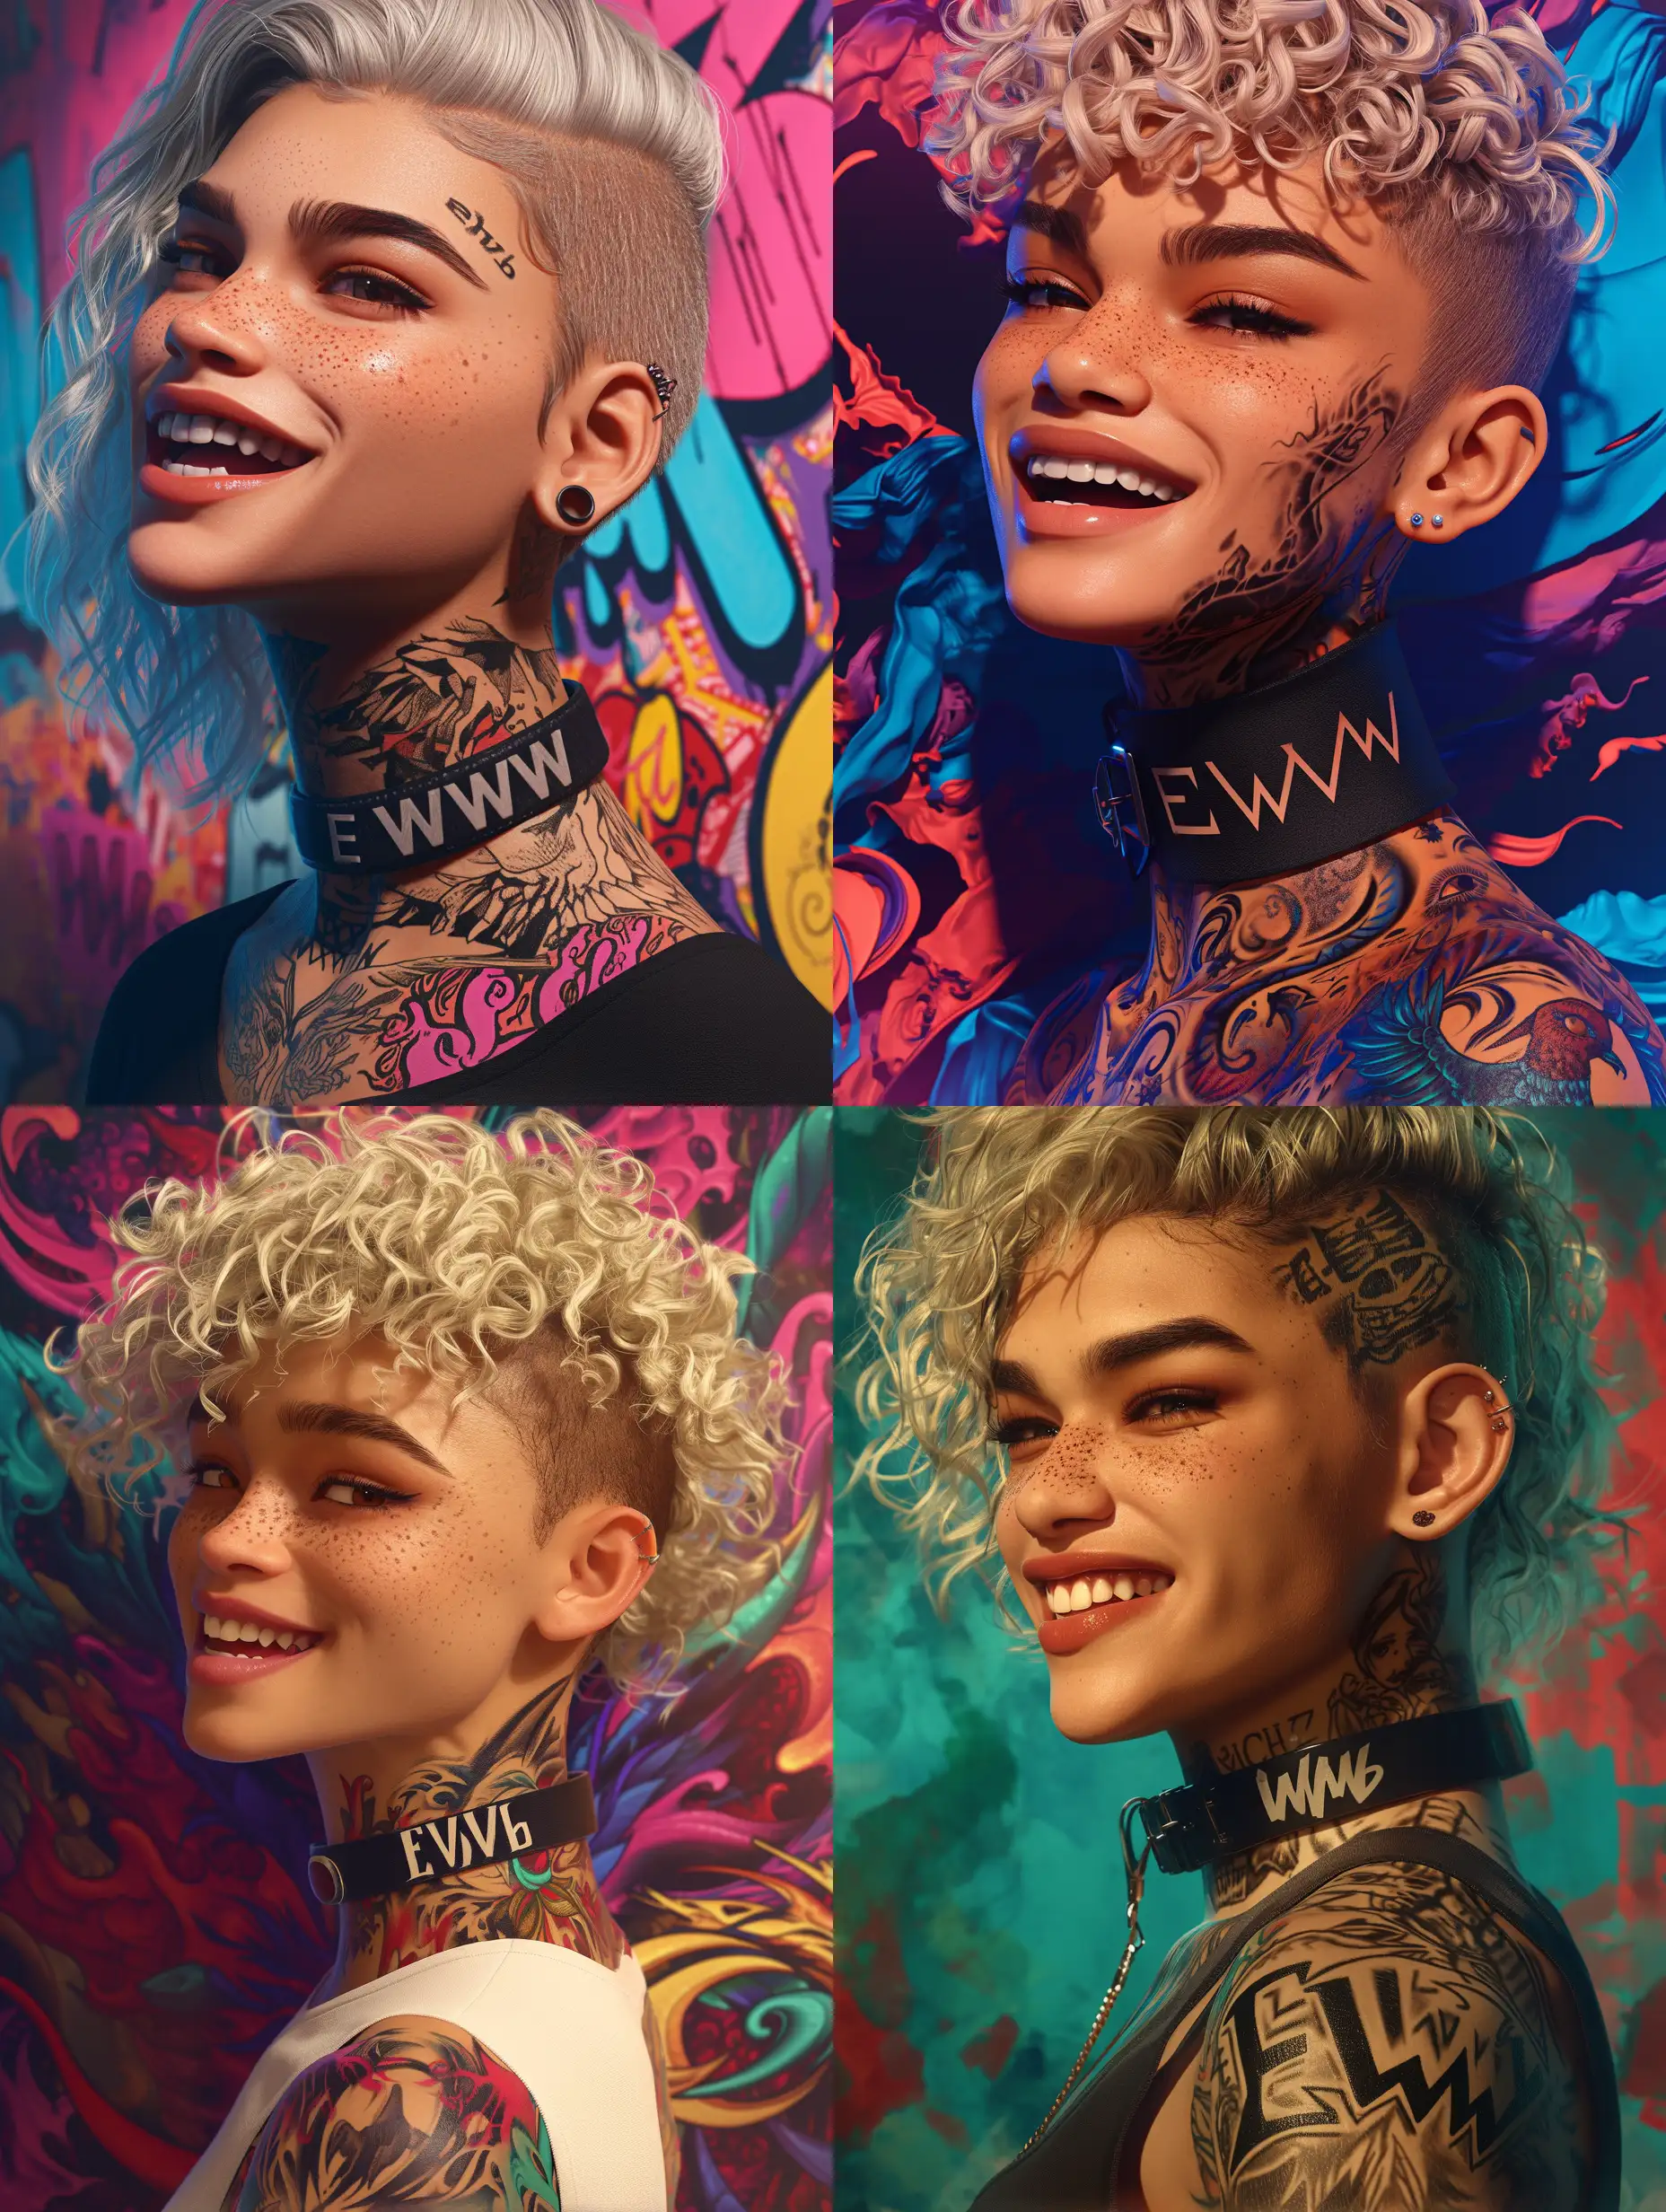 Stunning-Zendaya-with-Neck-Tattoo-and-Freckles-Hyperrealistic-3D-Character-Art